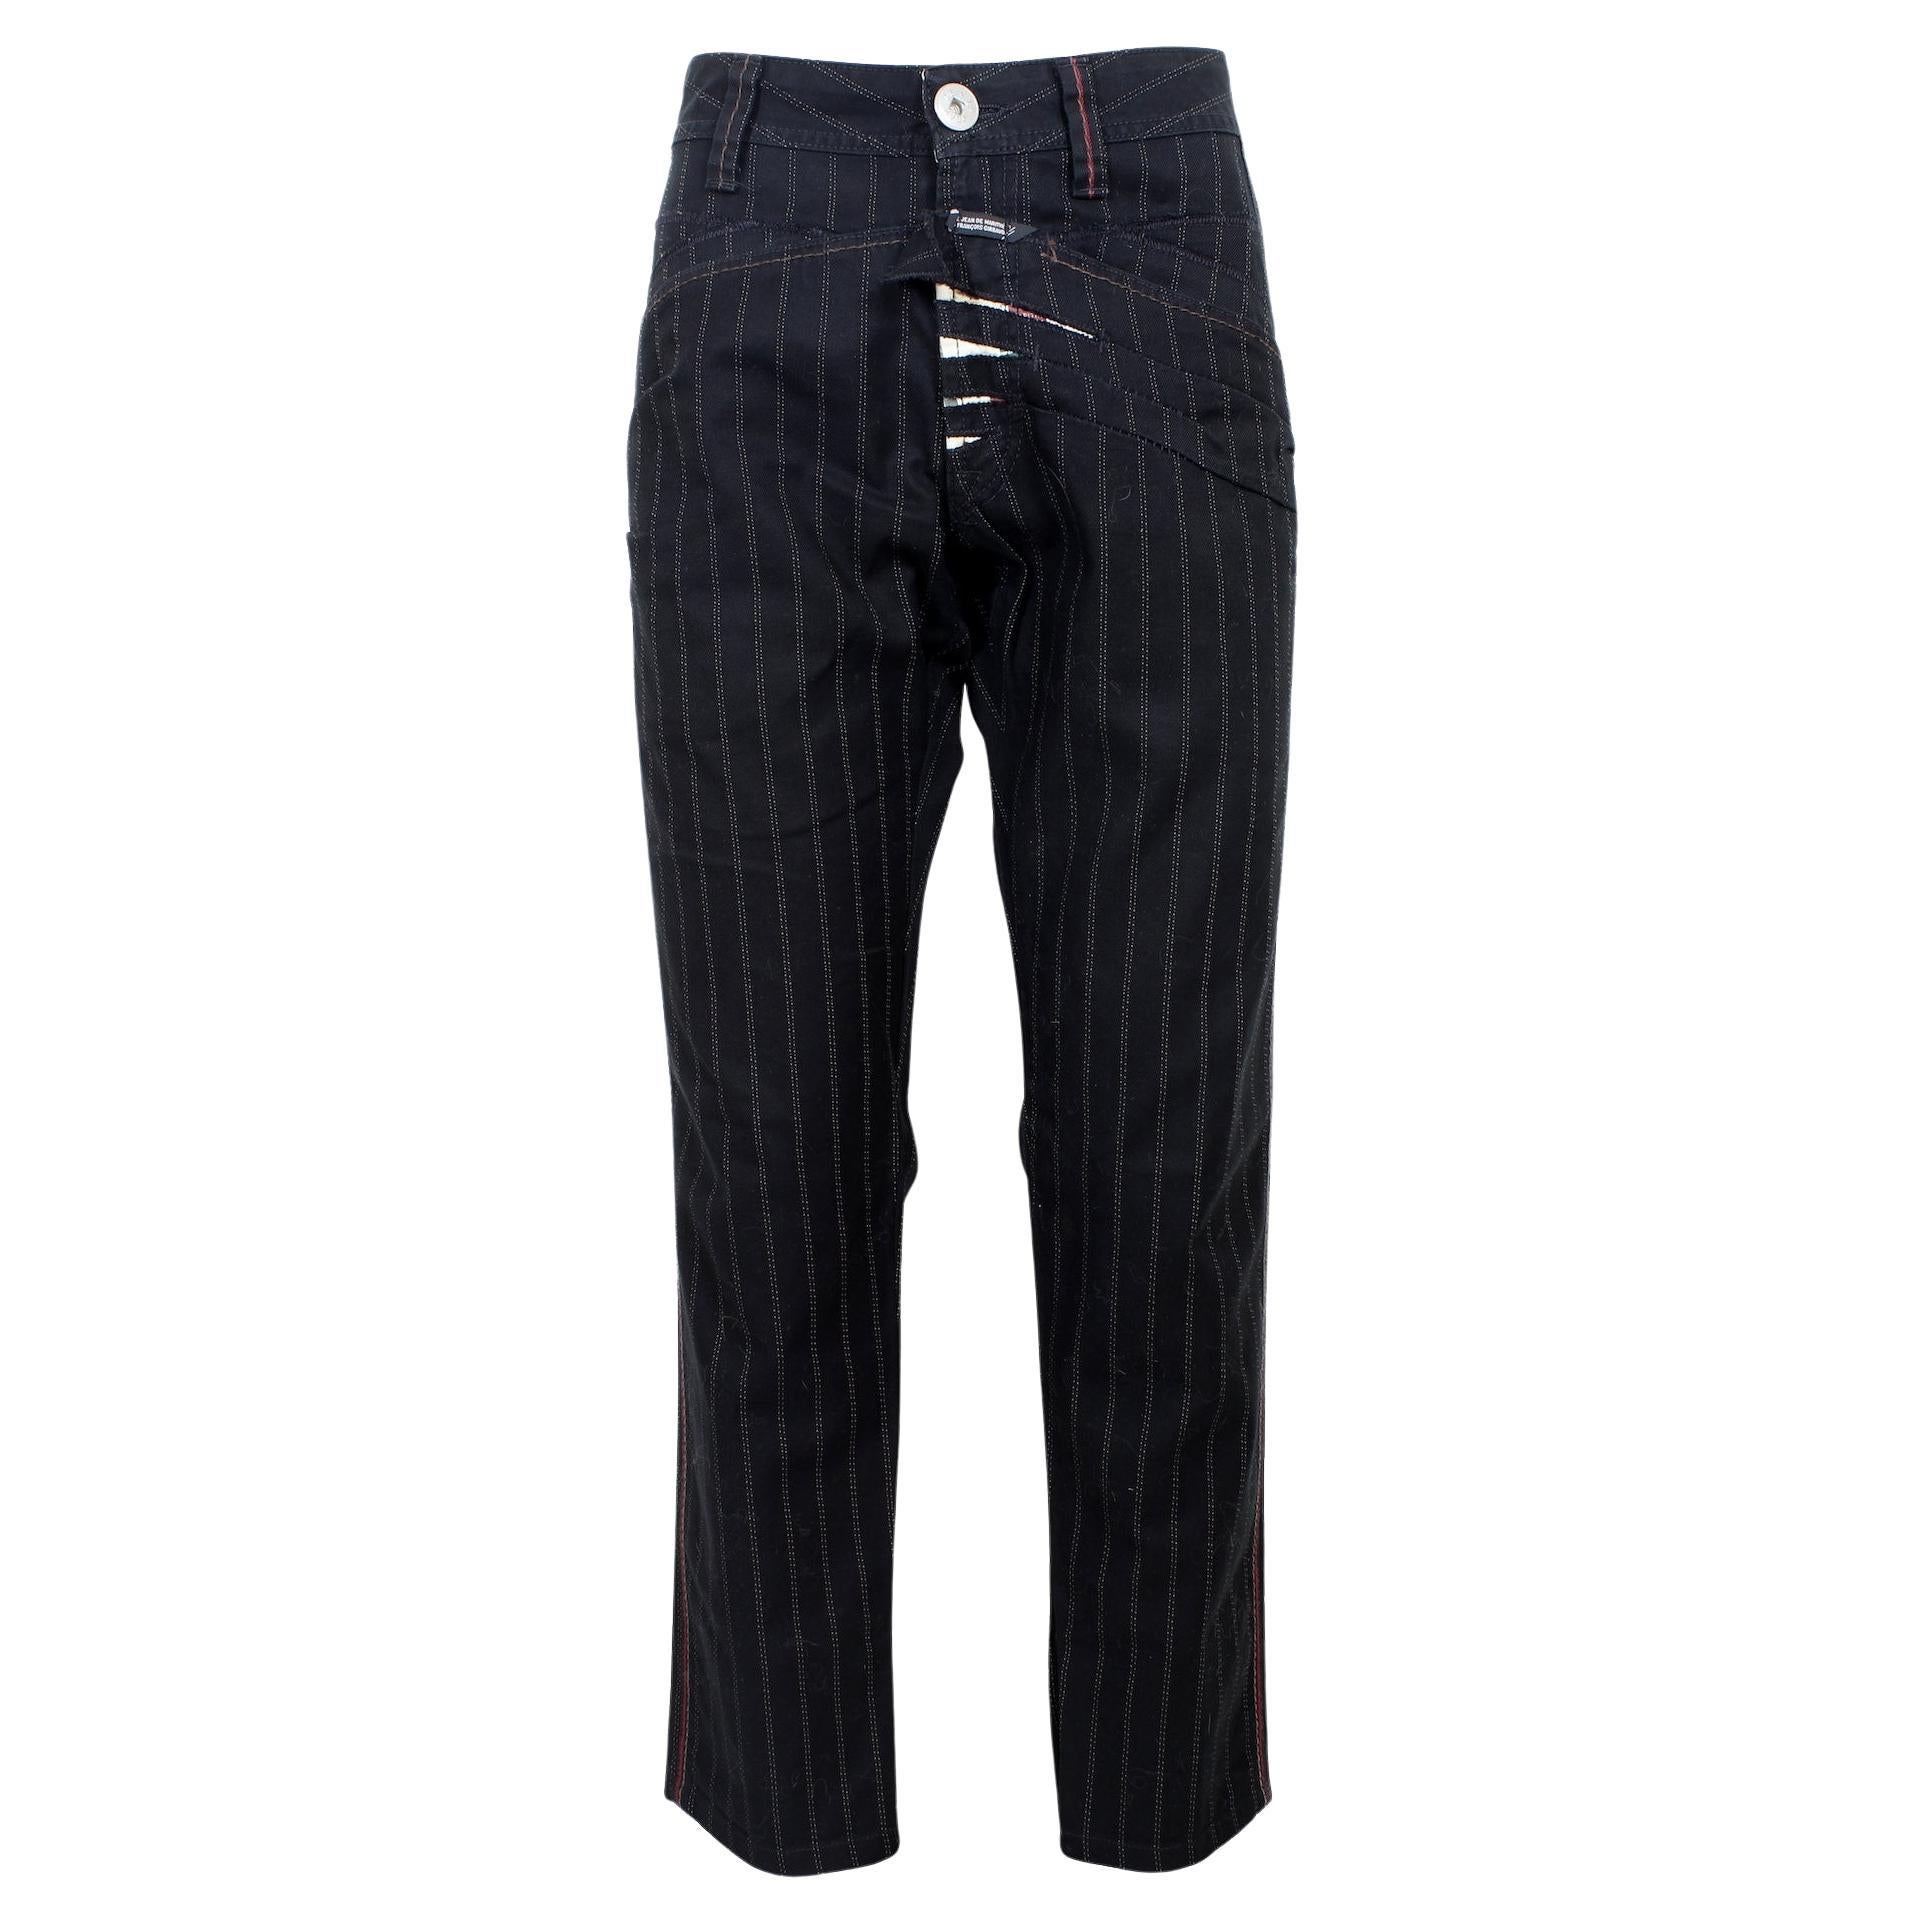 Marithe Francois Girbaud Black Pinstripe Cotton Trousers 90s